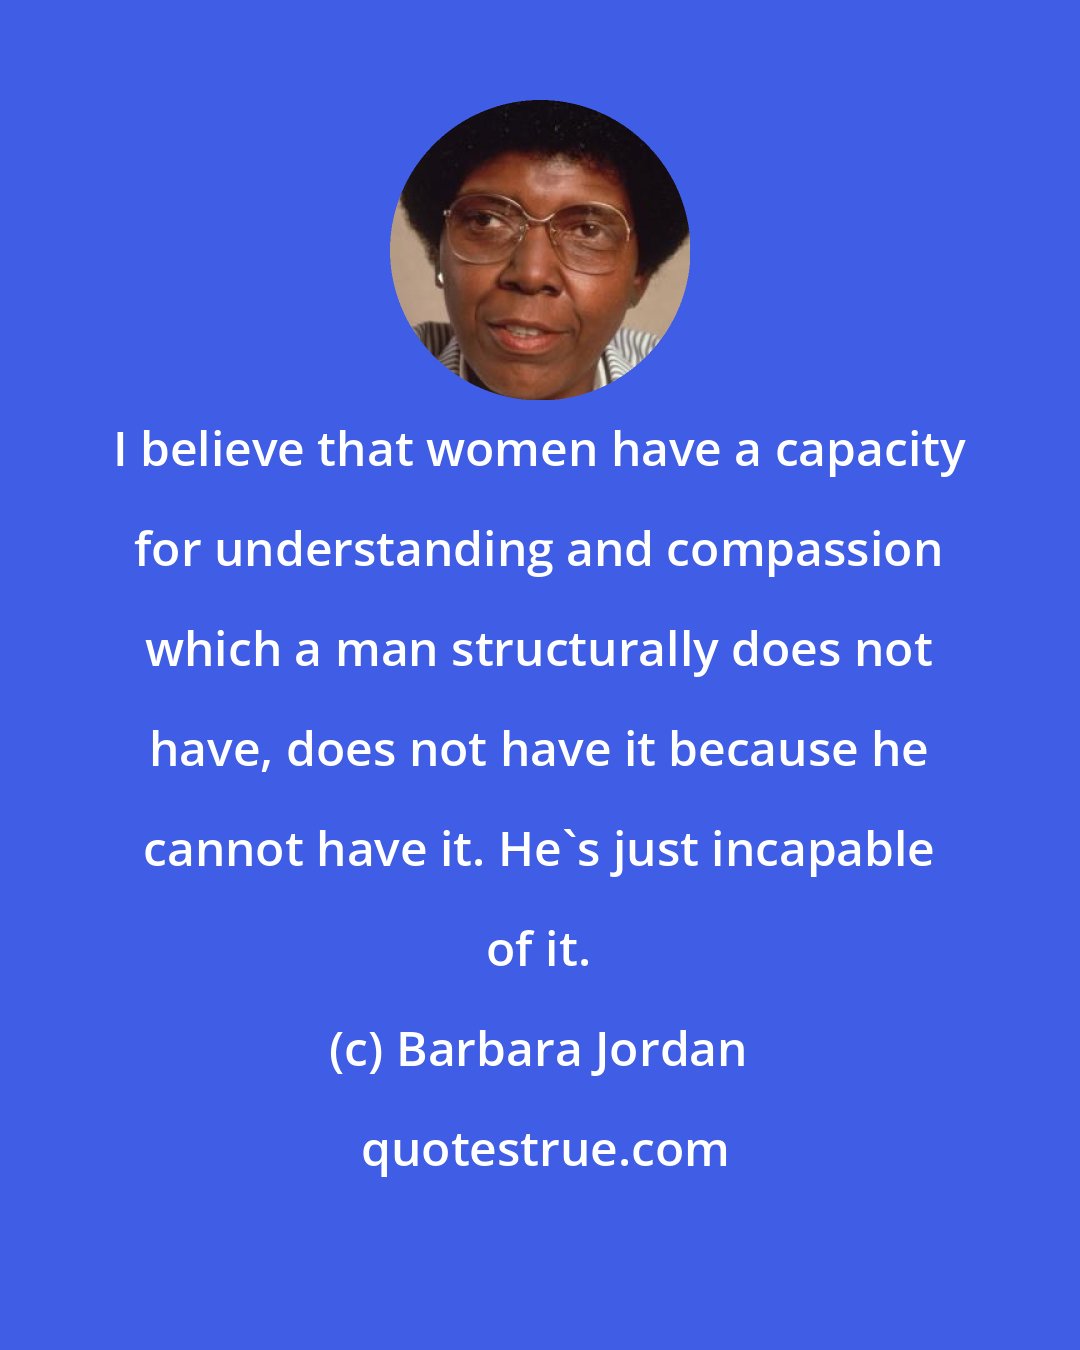 Barbara Jordan: I believe that women have a capacity for understanding and compassion which a man structurally does not have, does not have it because he cannot have it. He's just incapable of it.